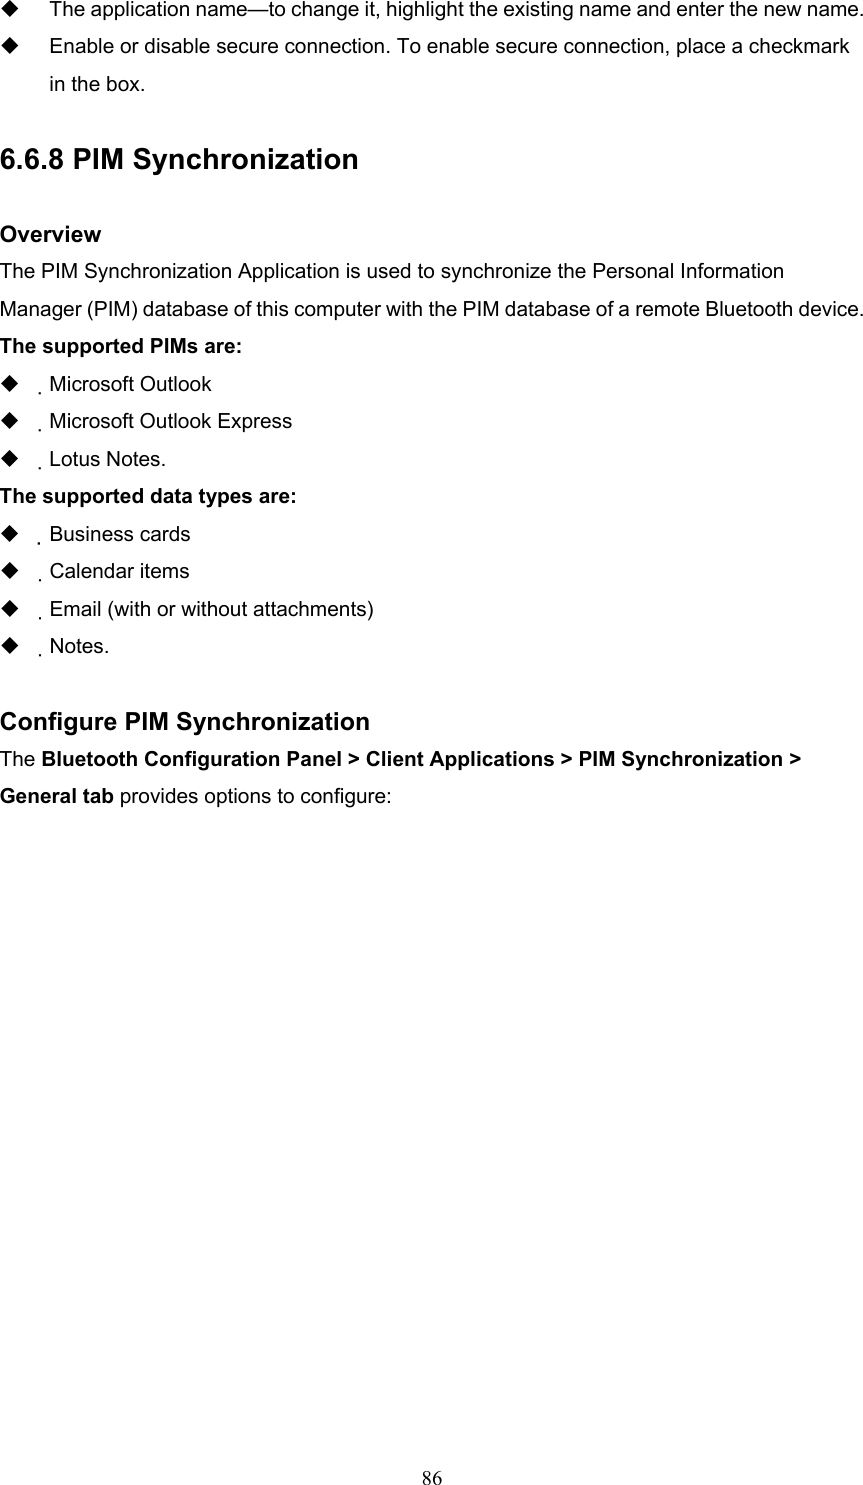  86   The application name—to change it, highlight the existing name and enter the new name.   Enable or disable secure connection. To enable secure connection, place a checkmark in the box.  6.6.8 PIM Synchronization  Overview The PIM Synchronization Application is used to synchronize the Personal Information Manager (PIM) database of this computer with the PIM database of a remote Bluetooth device. The supported PIMs are:   Microsoft Outlook   Microsoft Outlook Express   Lotus Notes. The supported data types are:   Business cards   Calendar items   Email (with or without attachments)   Notes.  Configure PIM Synchronization The Bluetooth Configuration Panel &gt; Client Applications &gt; PIM Synchronization &gt; General tab provides options to configure: 